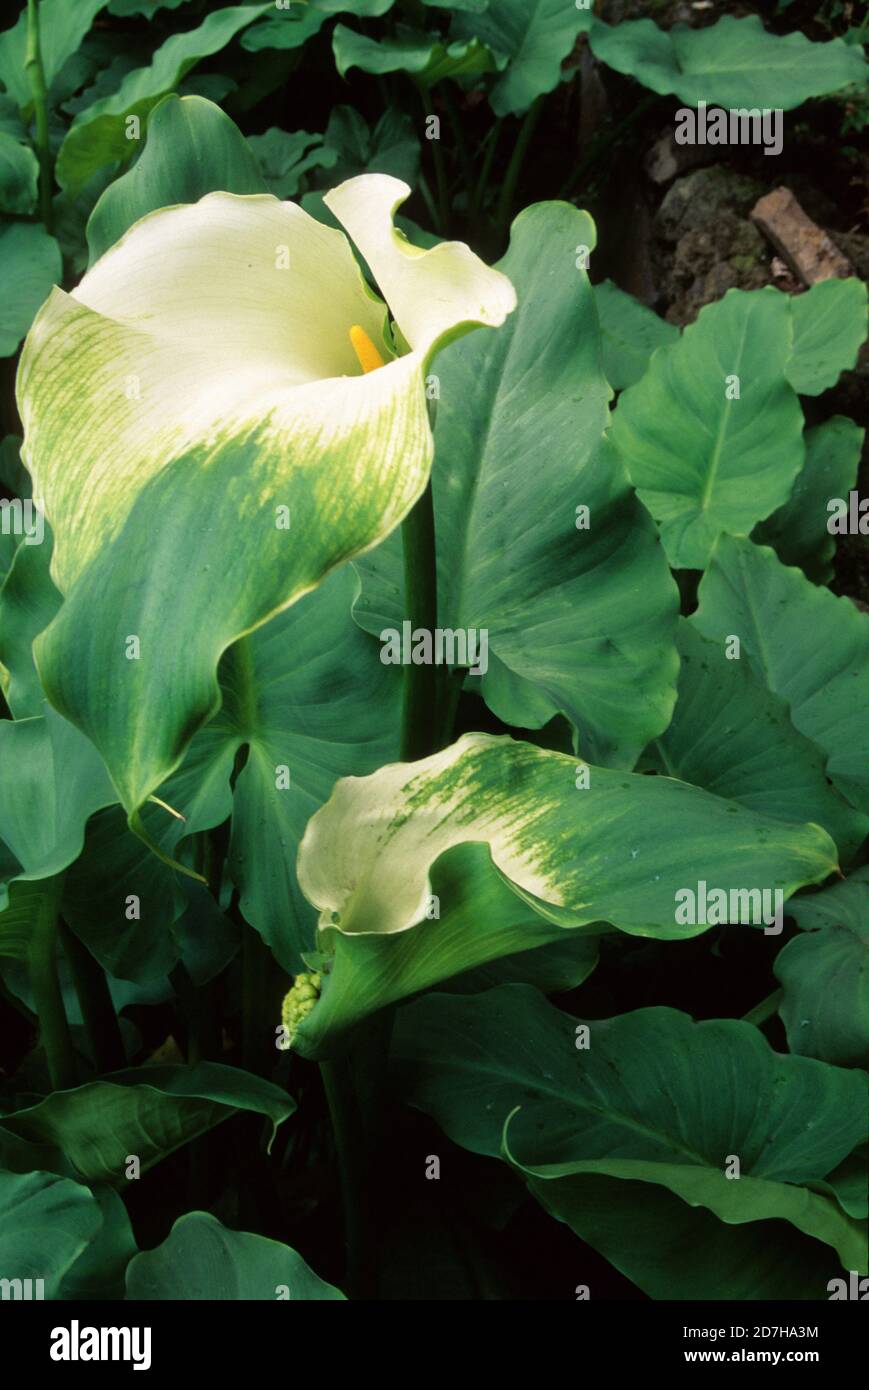 Arum lily (Zantedeschia aethiopica) 'Green Goddess' in bloom in spring Stock Photo